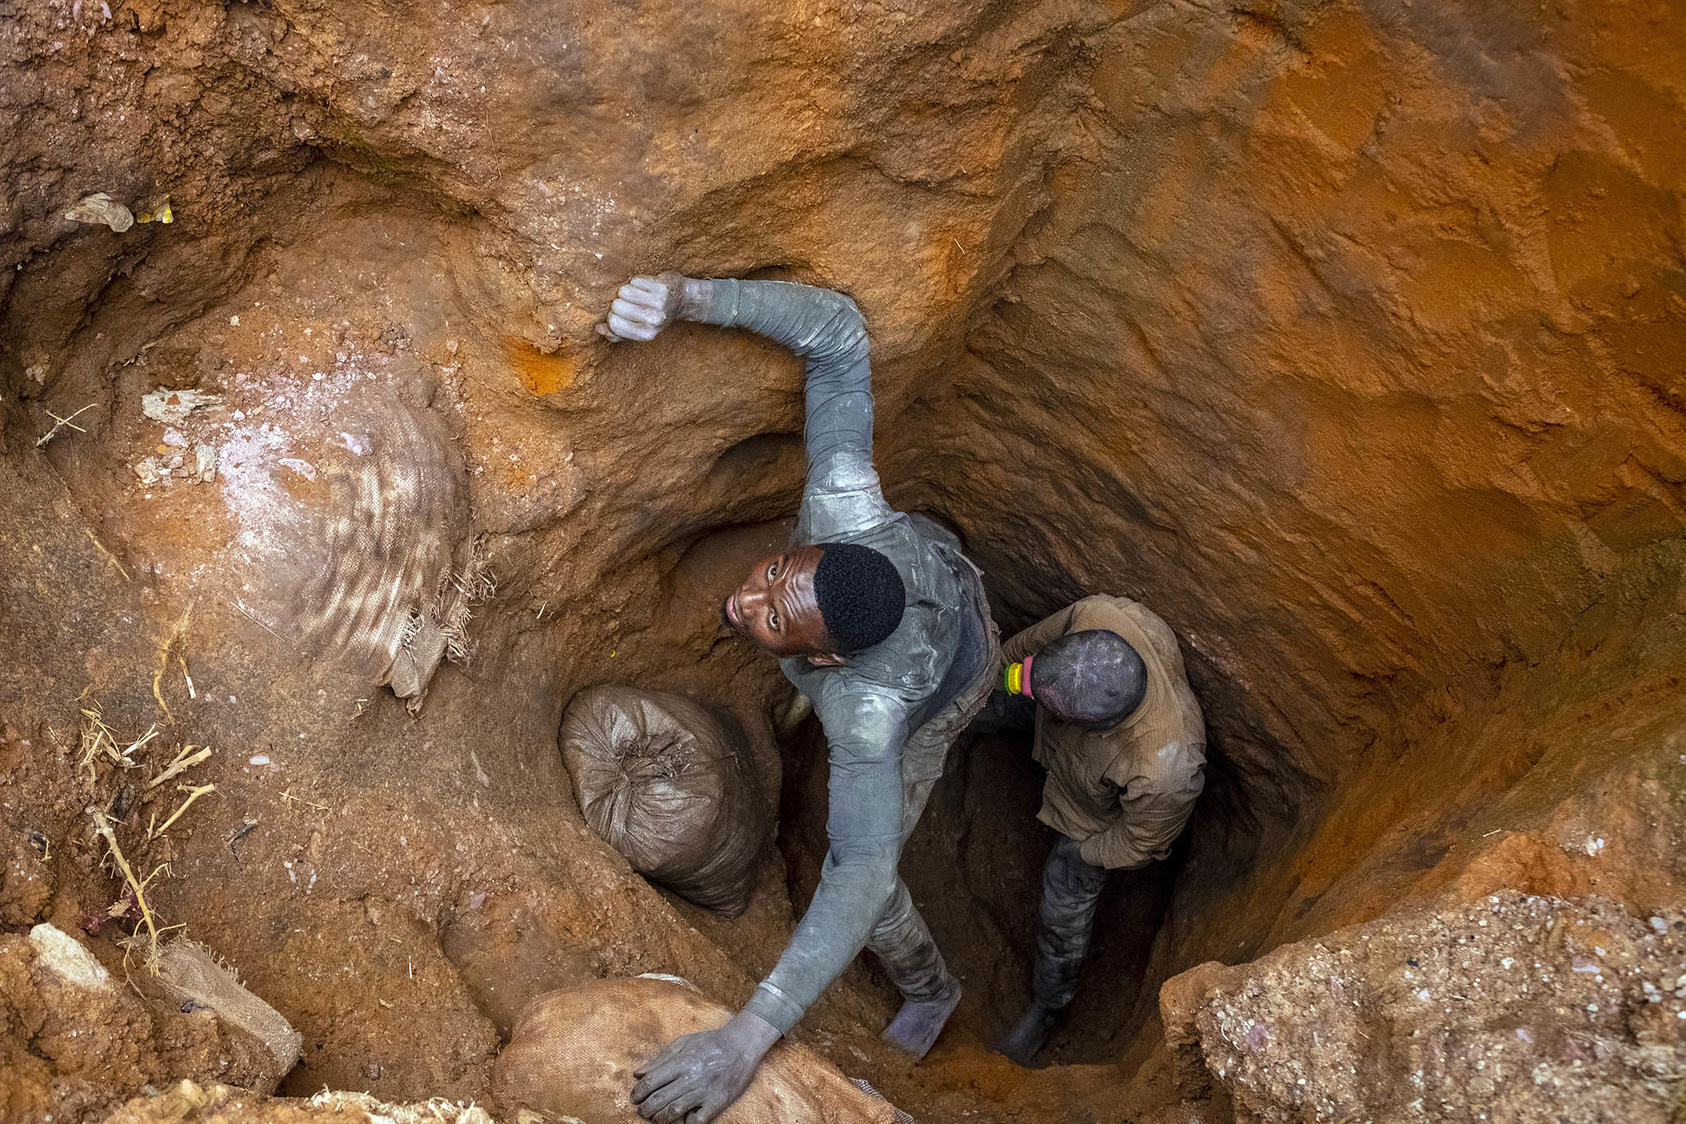 Jose Bumba, left, pulls a 220-pound bag of cobalt from a makeshift mine in Kasulo, the Democratic Republic of the Congo, on April 26, 2021. (Ashley Gilbertson/The New York Times)